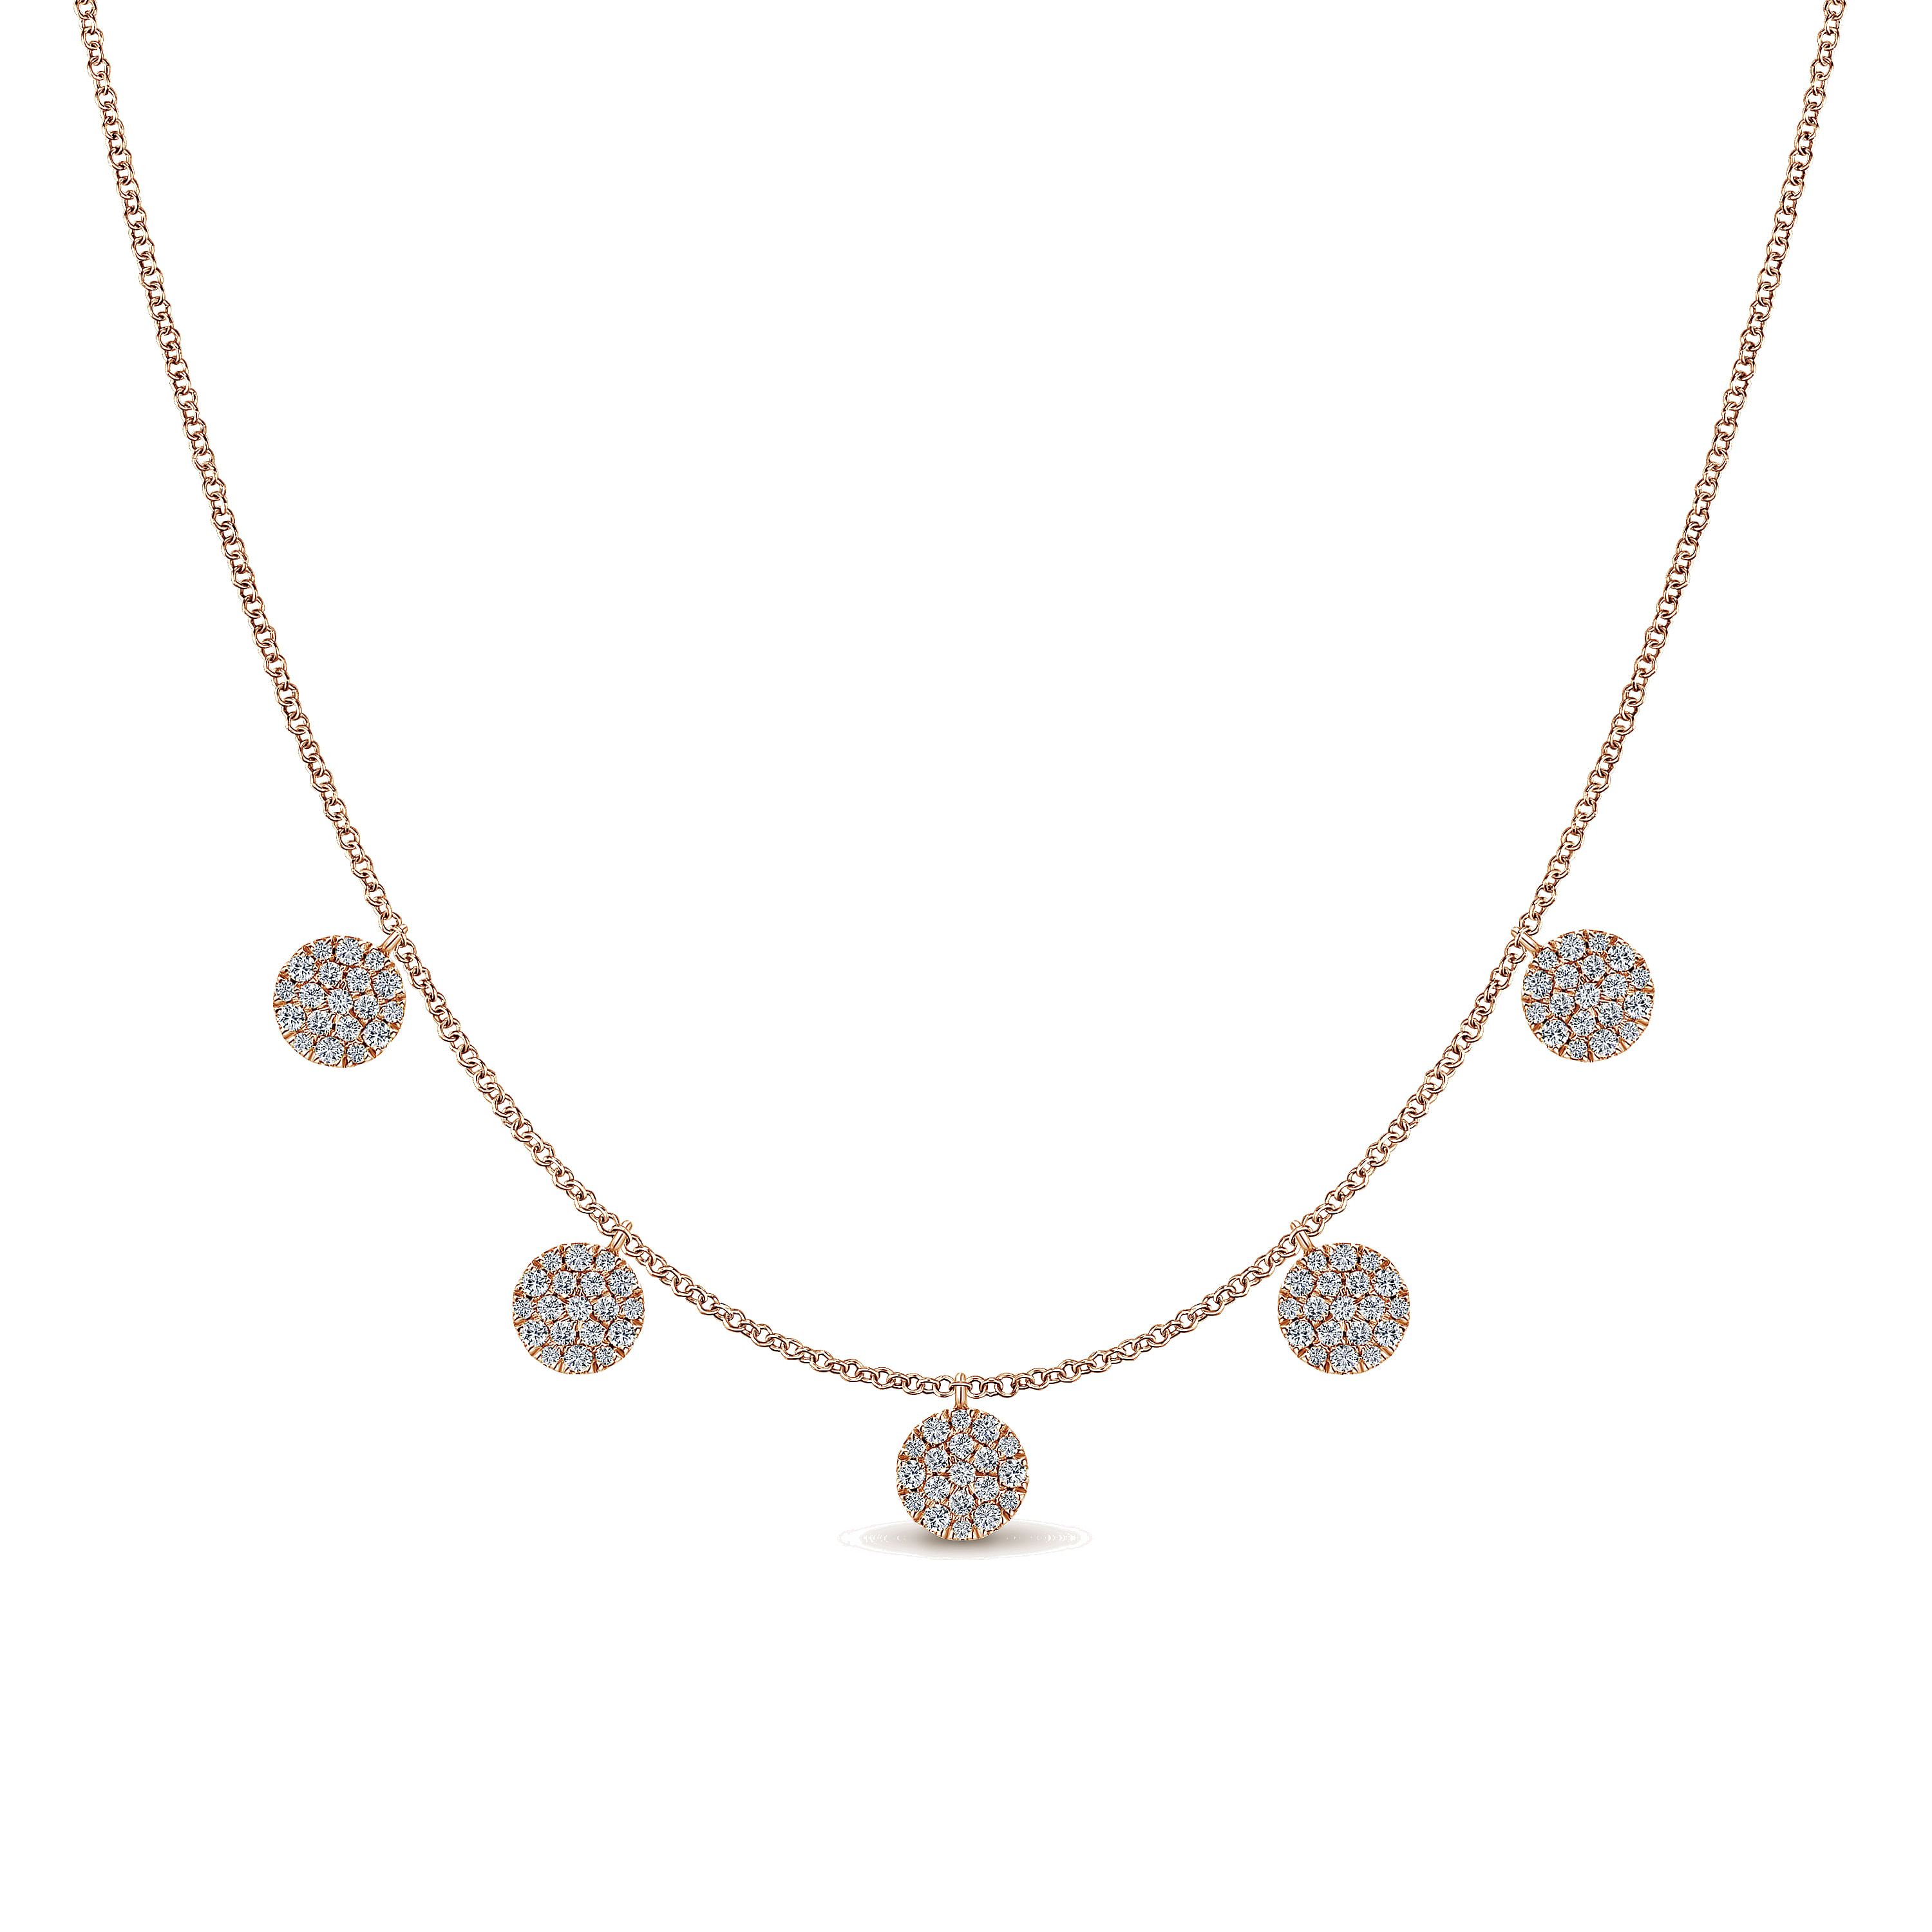 14K Rose Gold Necklace with Round Diamond Pave Disc Drops